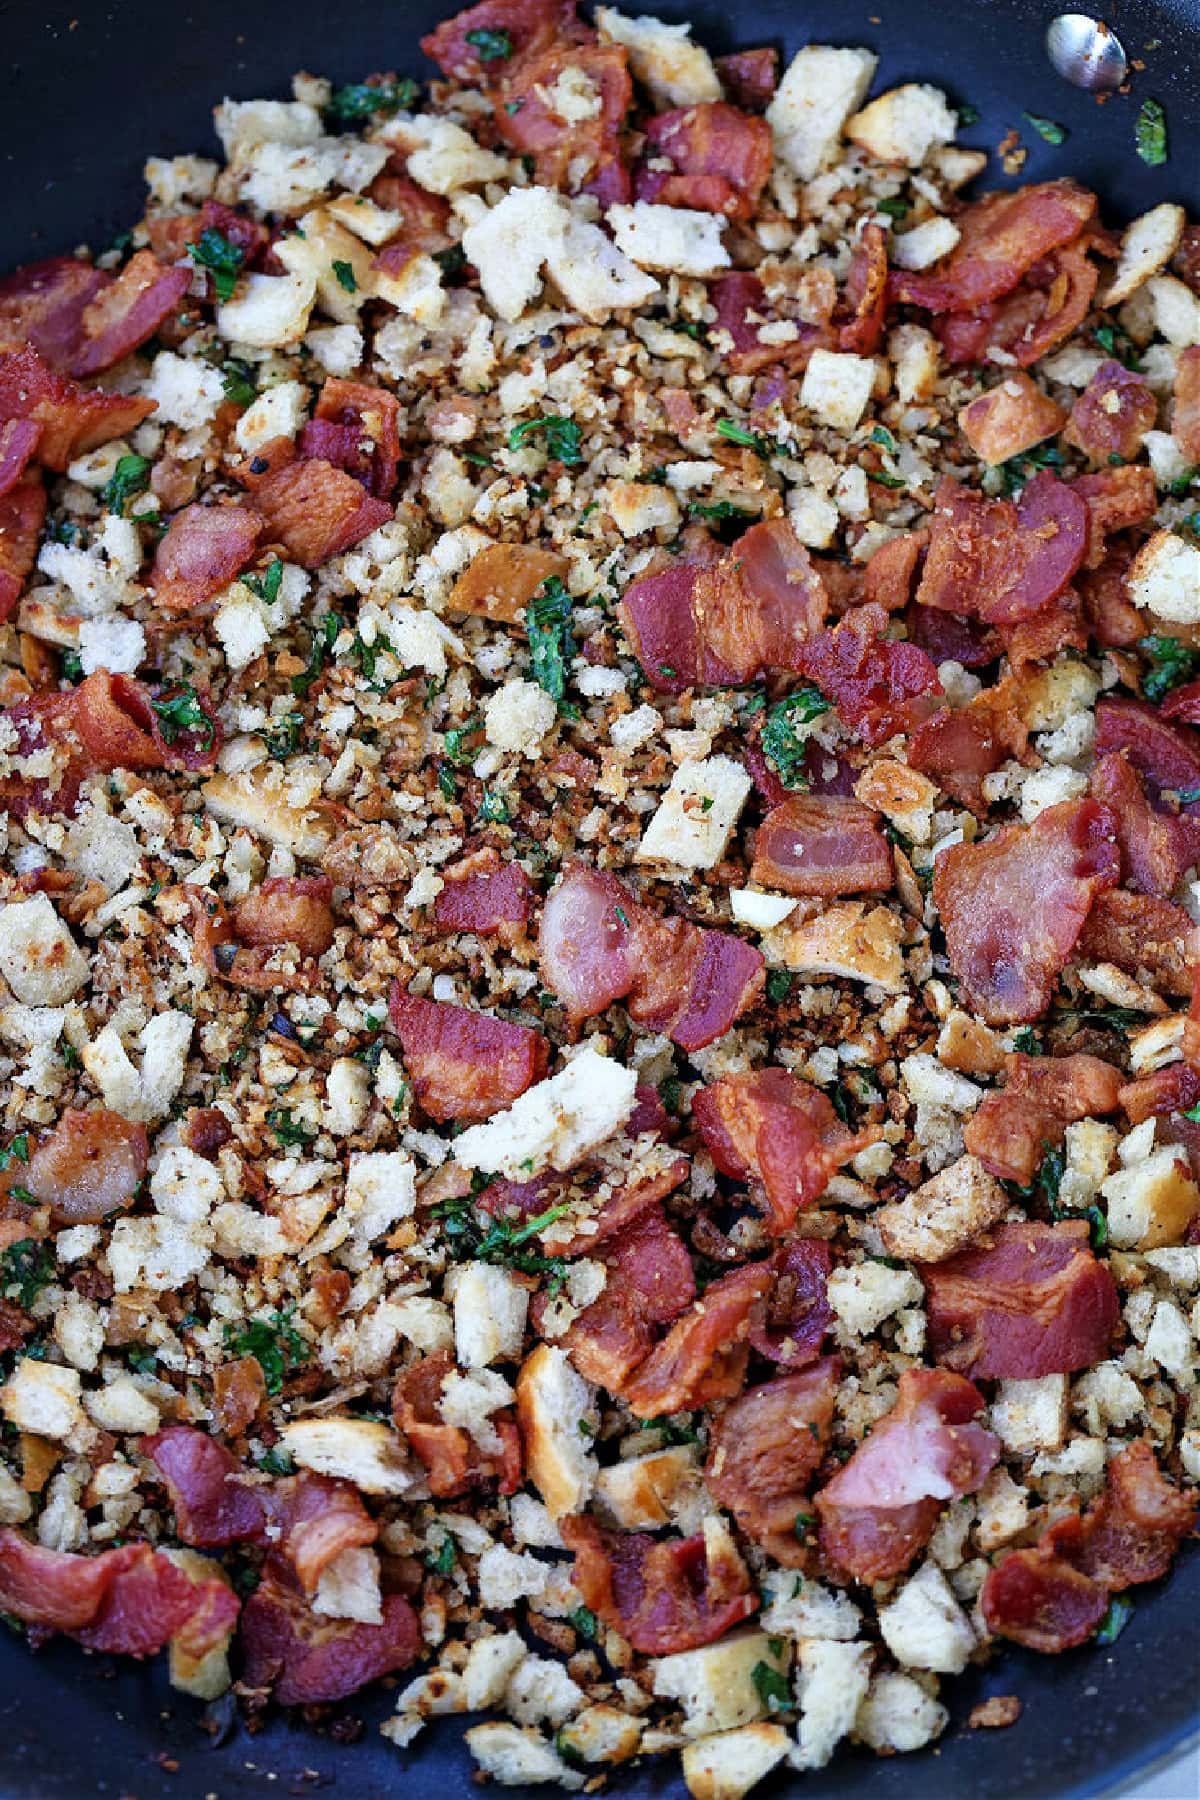 bacon and breadcrumbs in a skillet